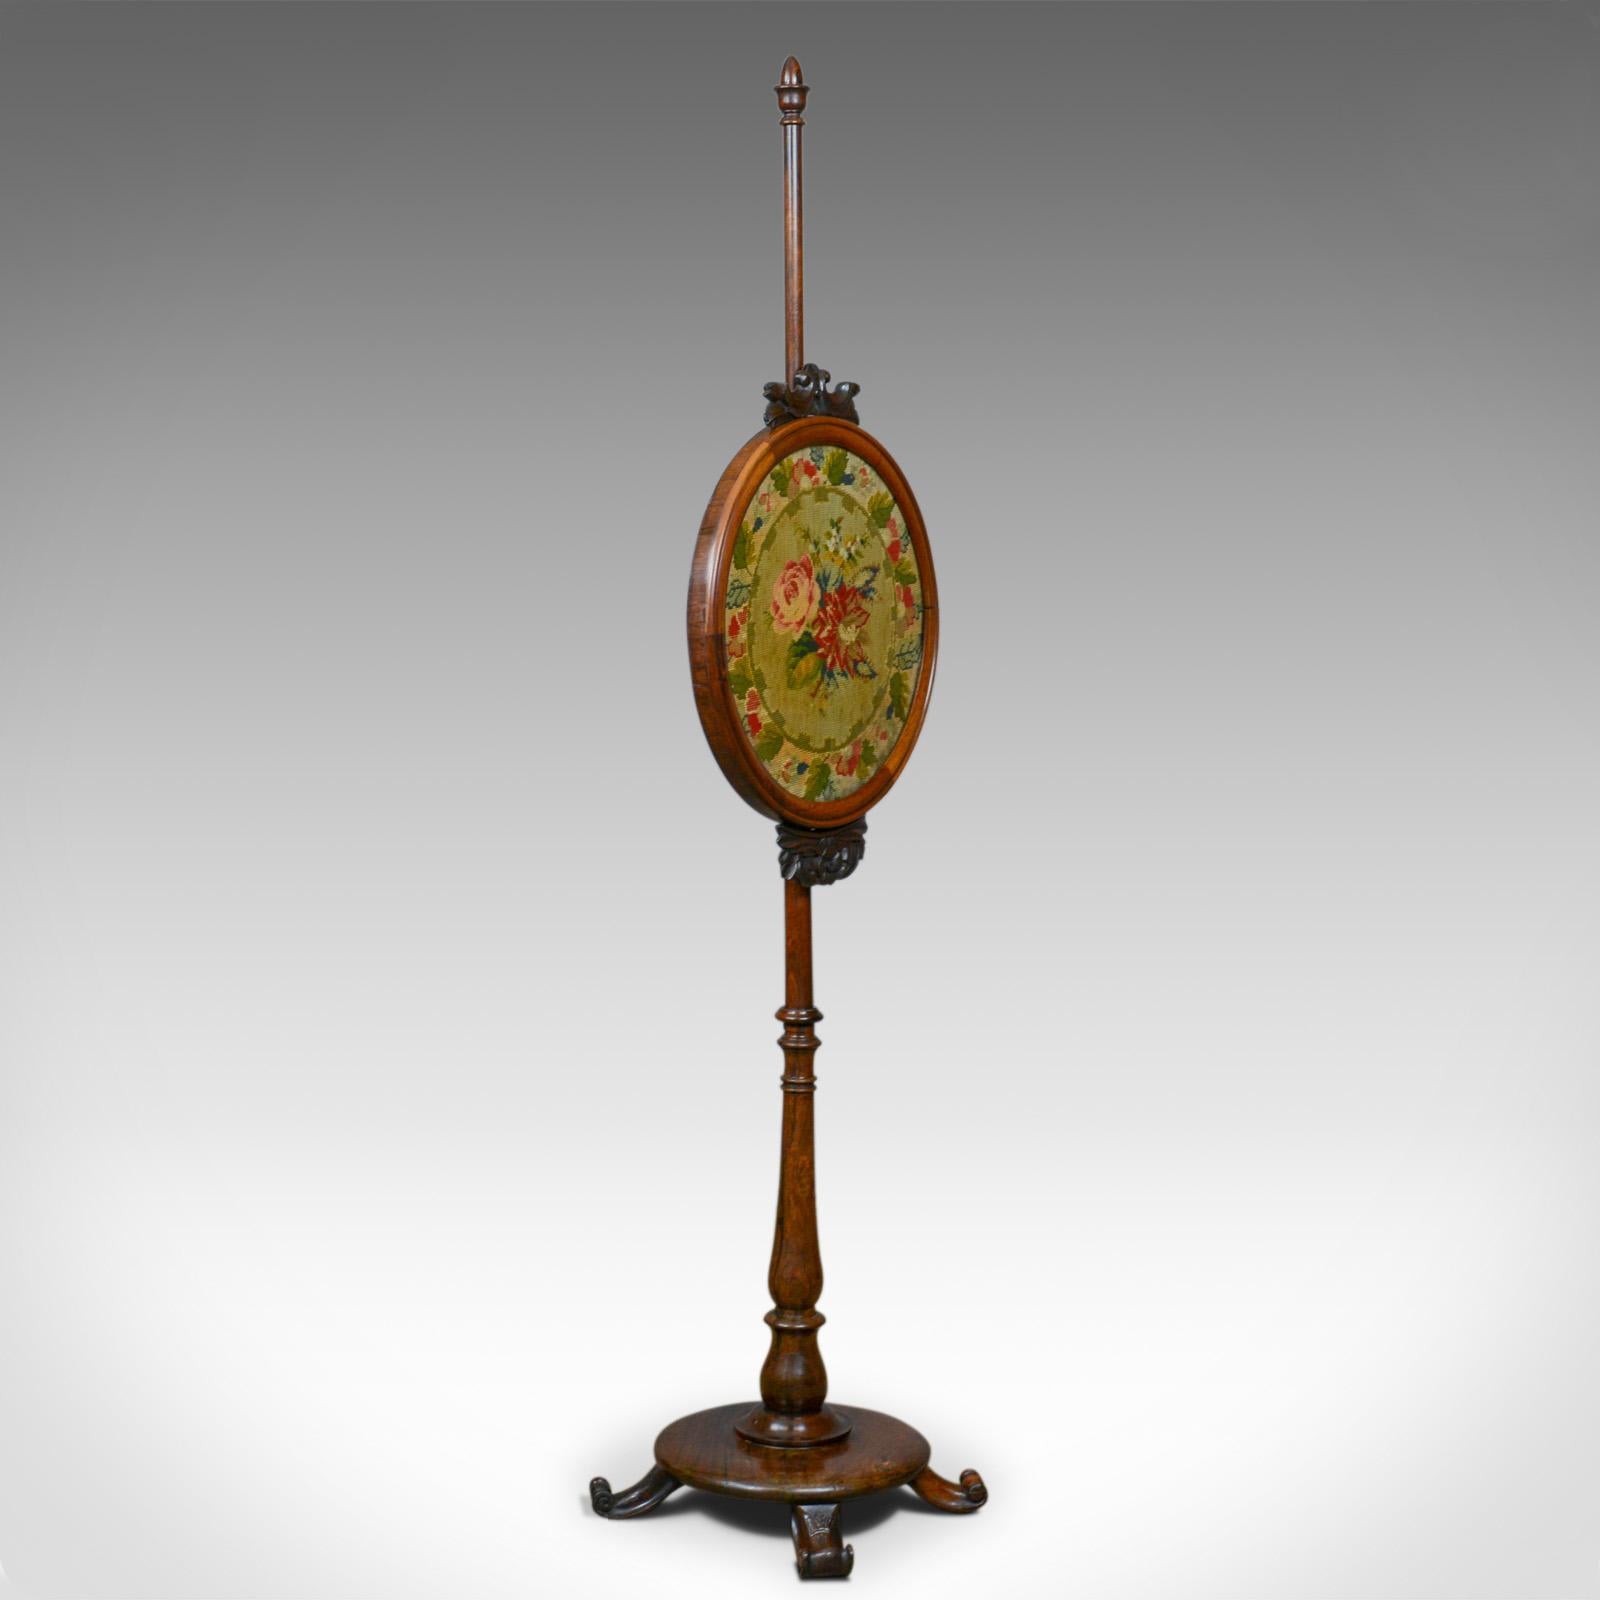 This is an antique pole screen, an English, Regency fire screen with needlepoint tapestry panel dating to the early 19th century, circa 1815.

Raised on a fine rosewood stand with good color and grain interest
Adjustable, circular needlepoint